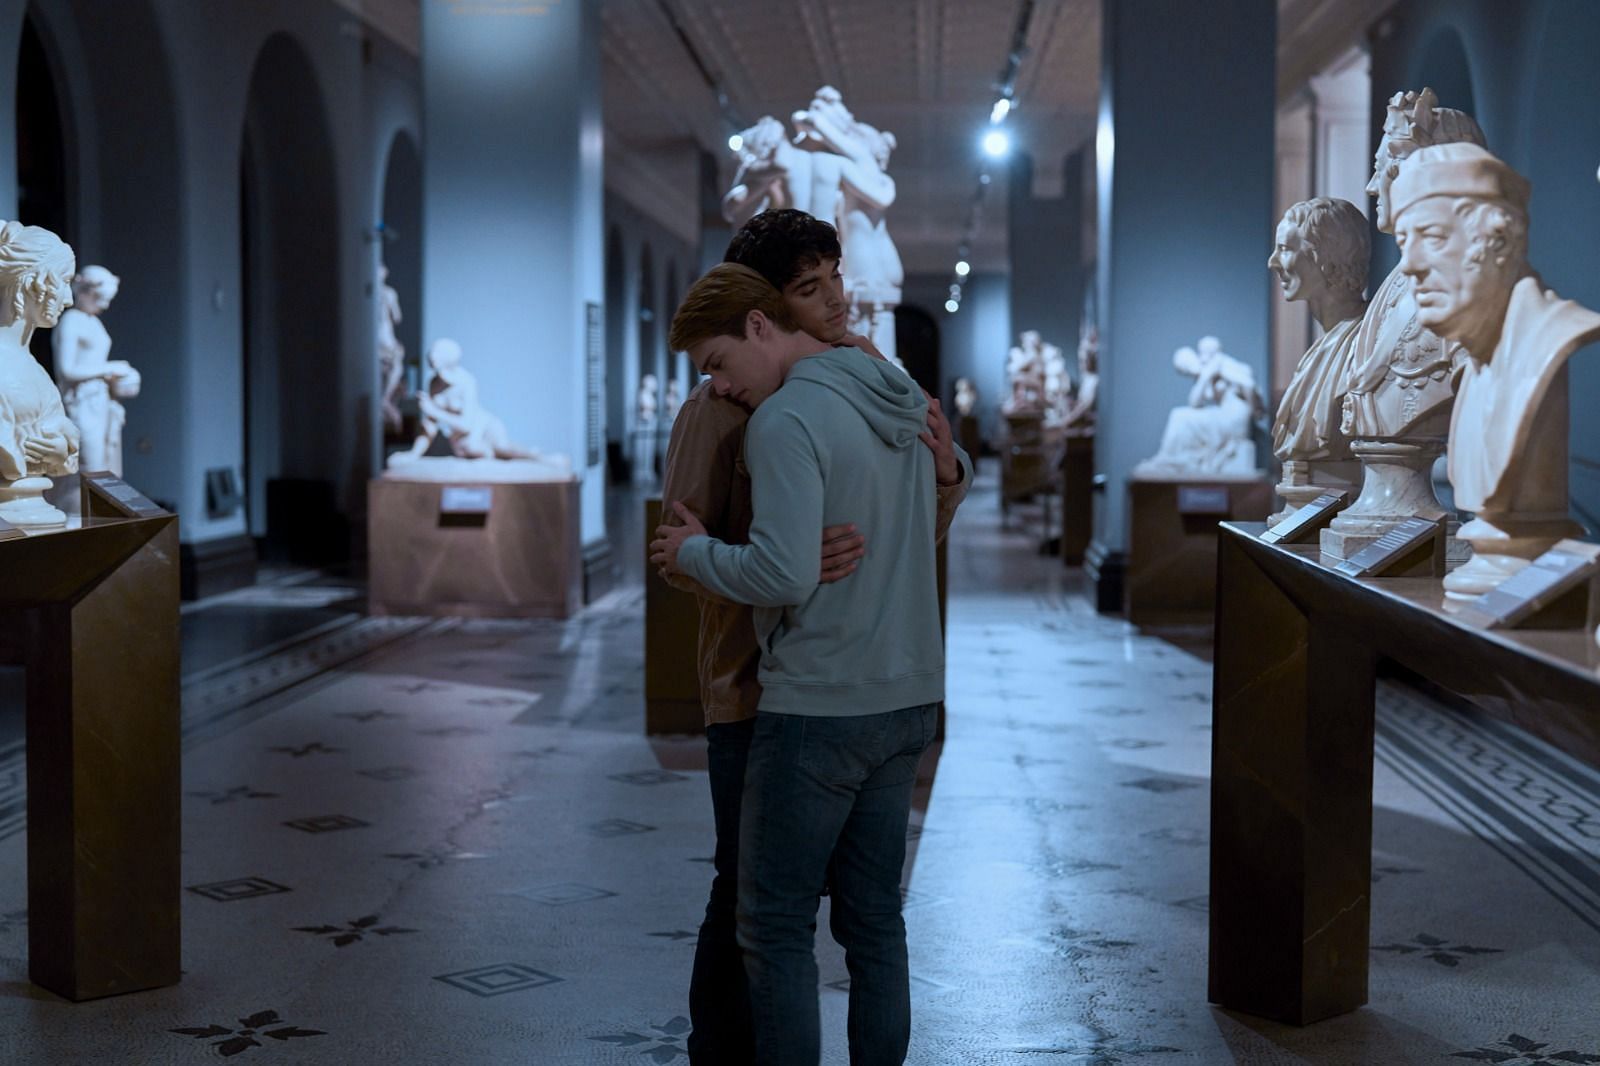 The moment shared by the lovers in the museum (image via Amazon Prime Video)